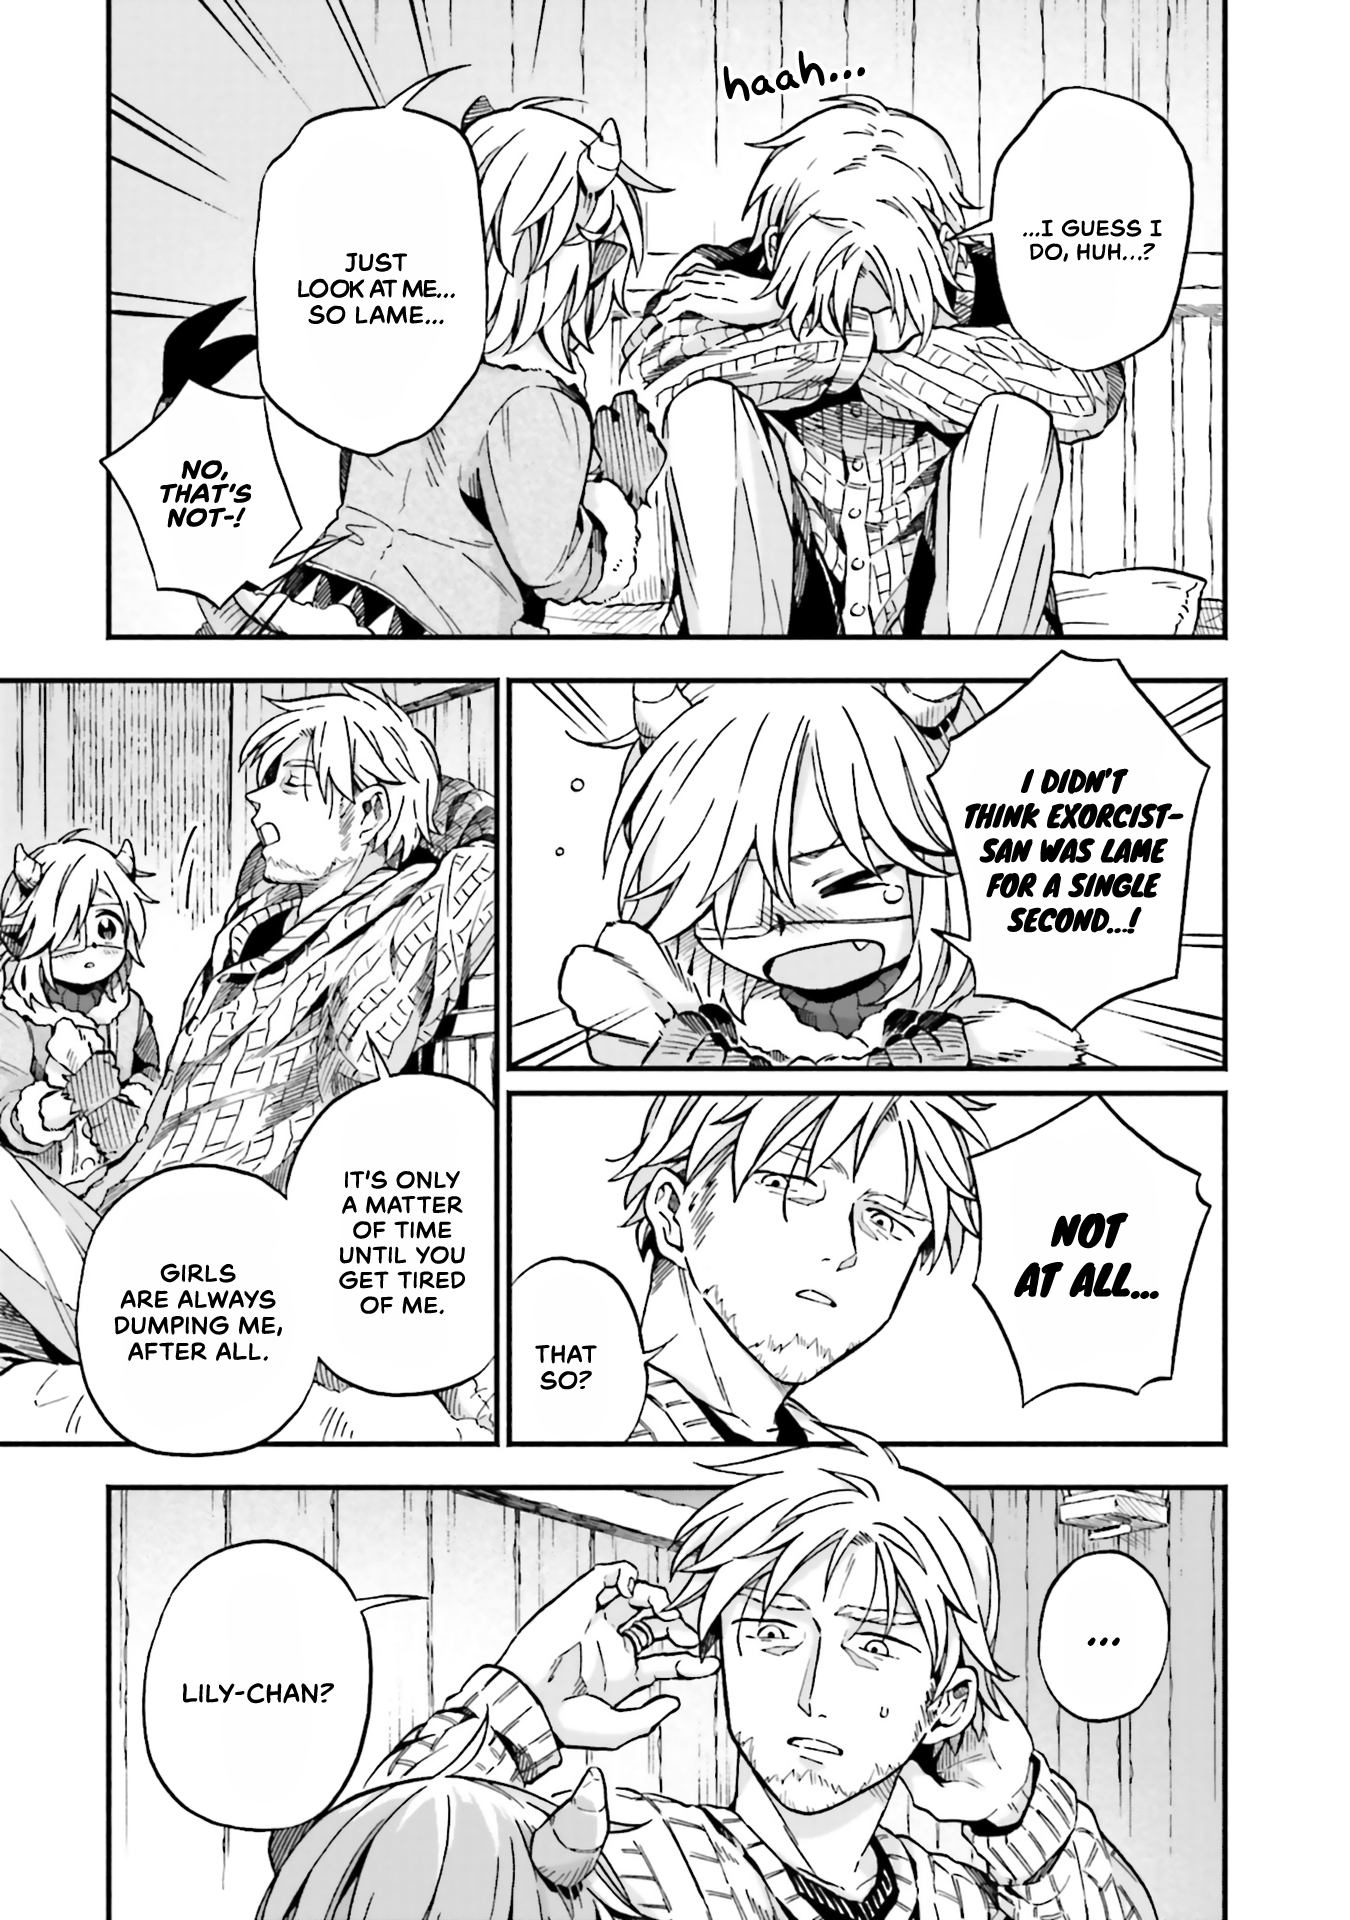 Exorcist and Devil-chan - chapter 26.5 - #6